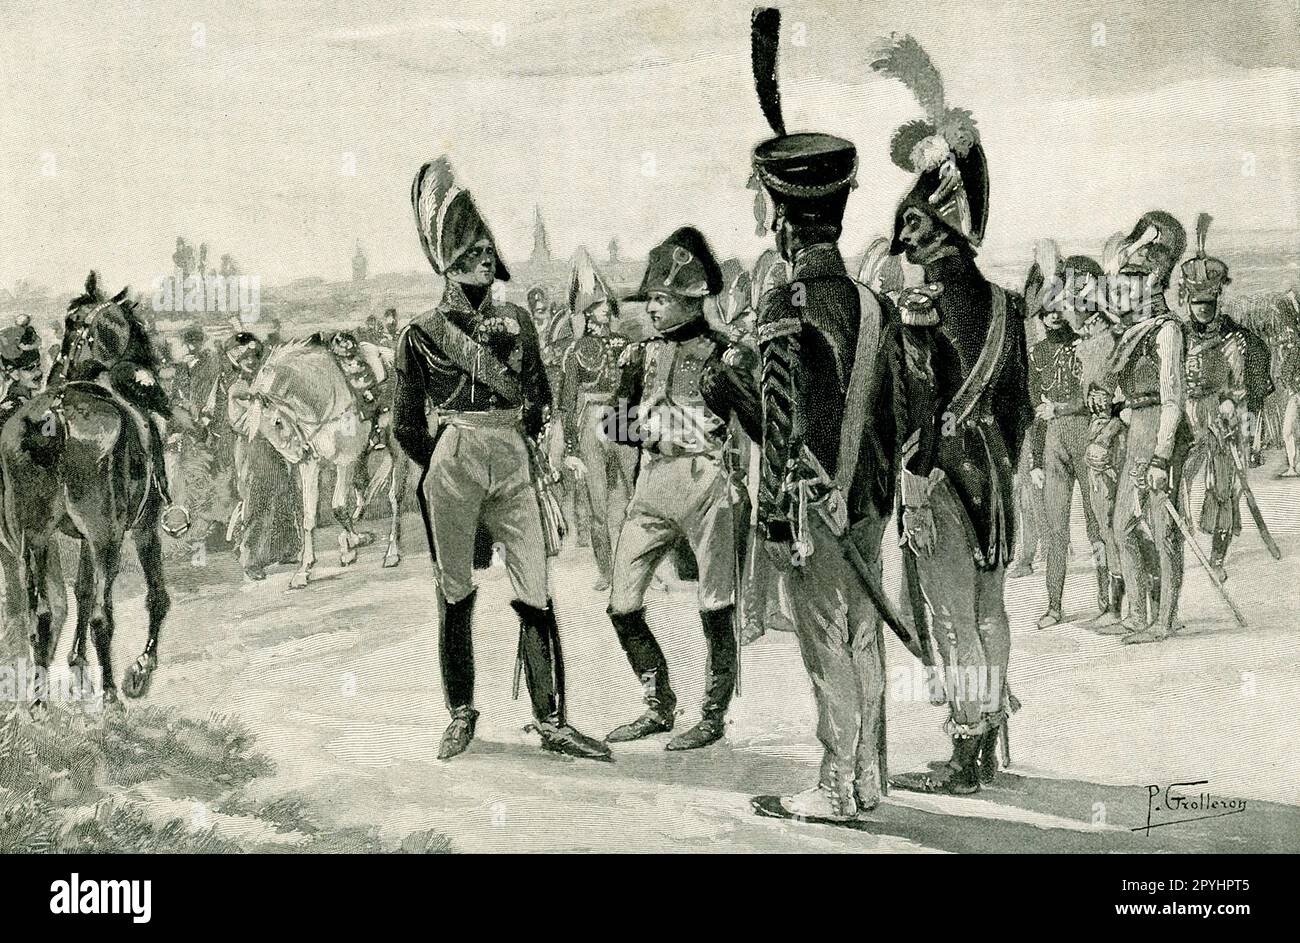 This image from an 1896 Century Magazine shows the Drum Majors of Napoleon. It is by P Grolleron. Napoleon Bonaparte (1769–1821) was a French military and political leader who became the emperor of France. The French painter and illustrator, Paul Grolleron, remains best known for his many well-observed images of the Franco-Prussian war. Stock Photo